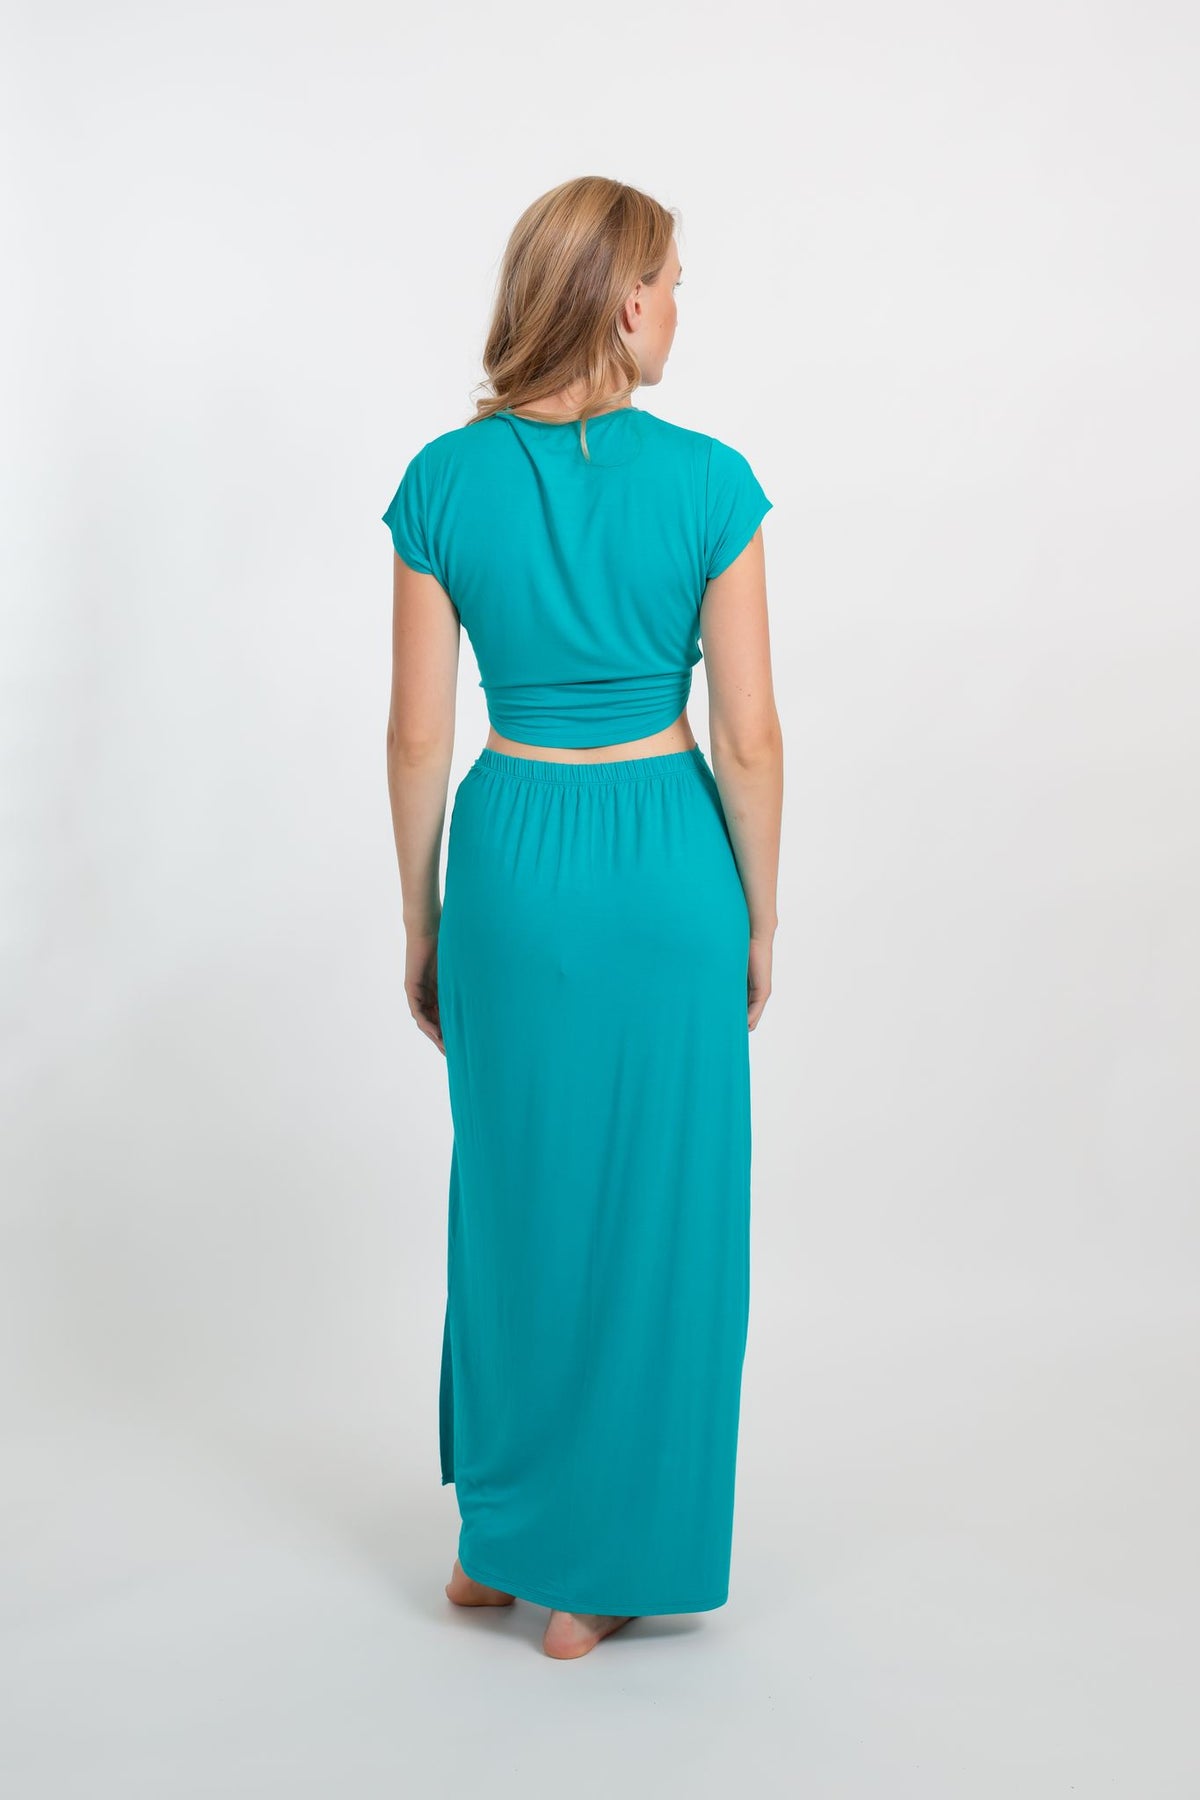 the back of a blonde hair woman model wearing matching aqua color top and skirt from Koy Resort